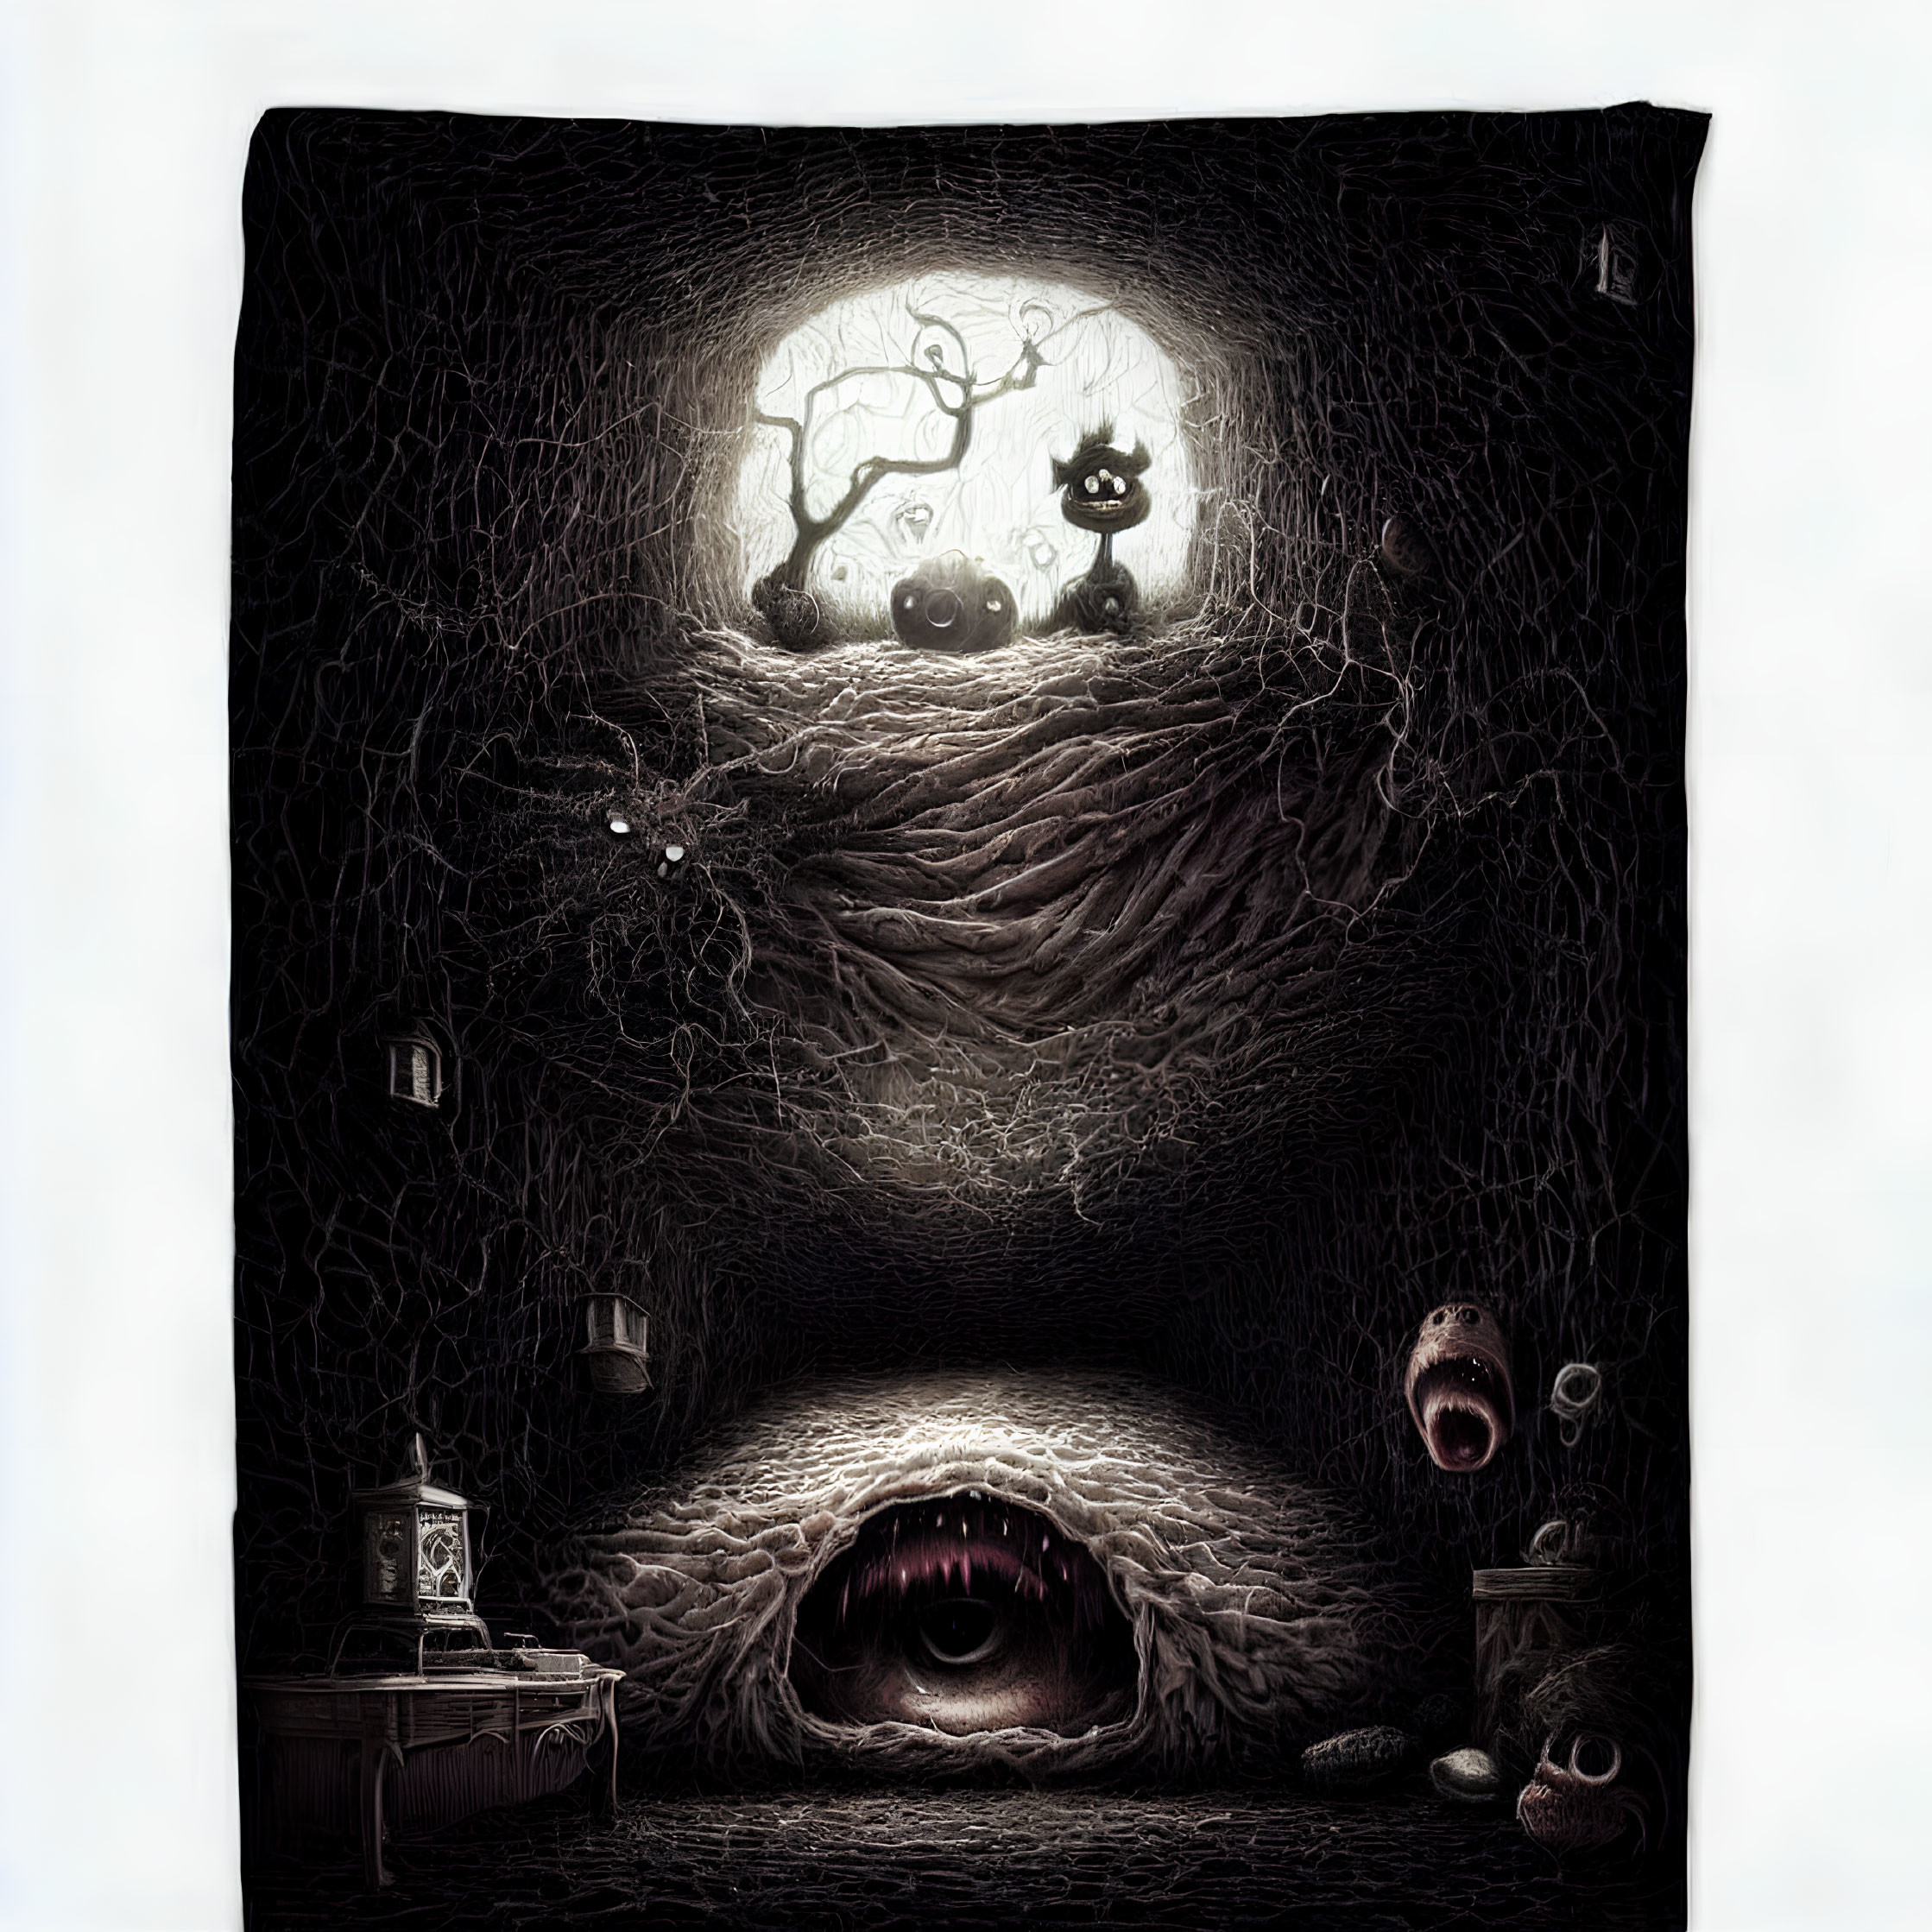 Dark room with mouth, eye, black tree, and entwined creatures.